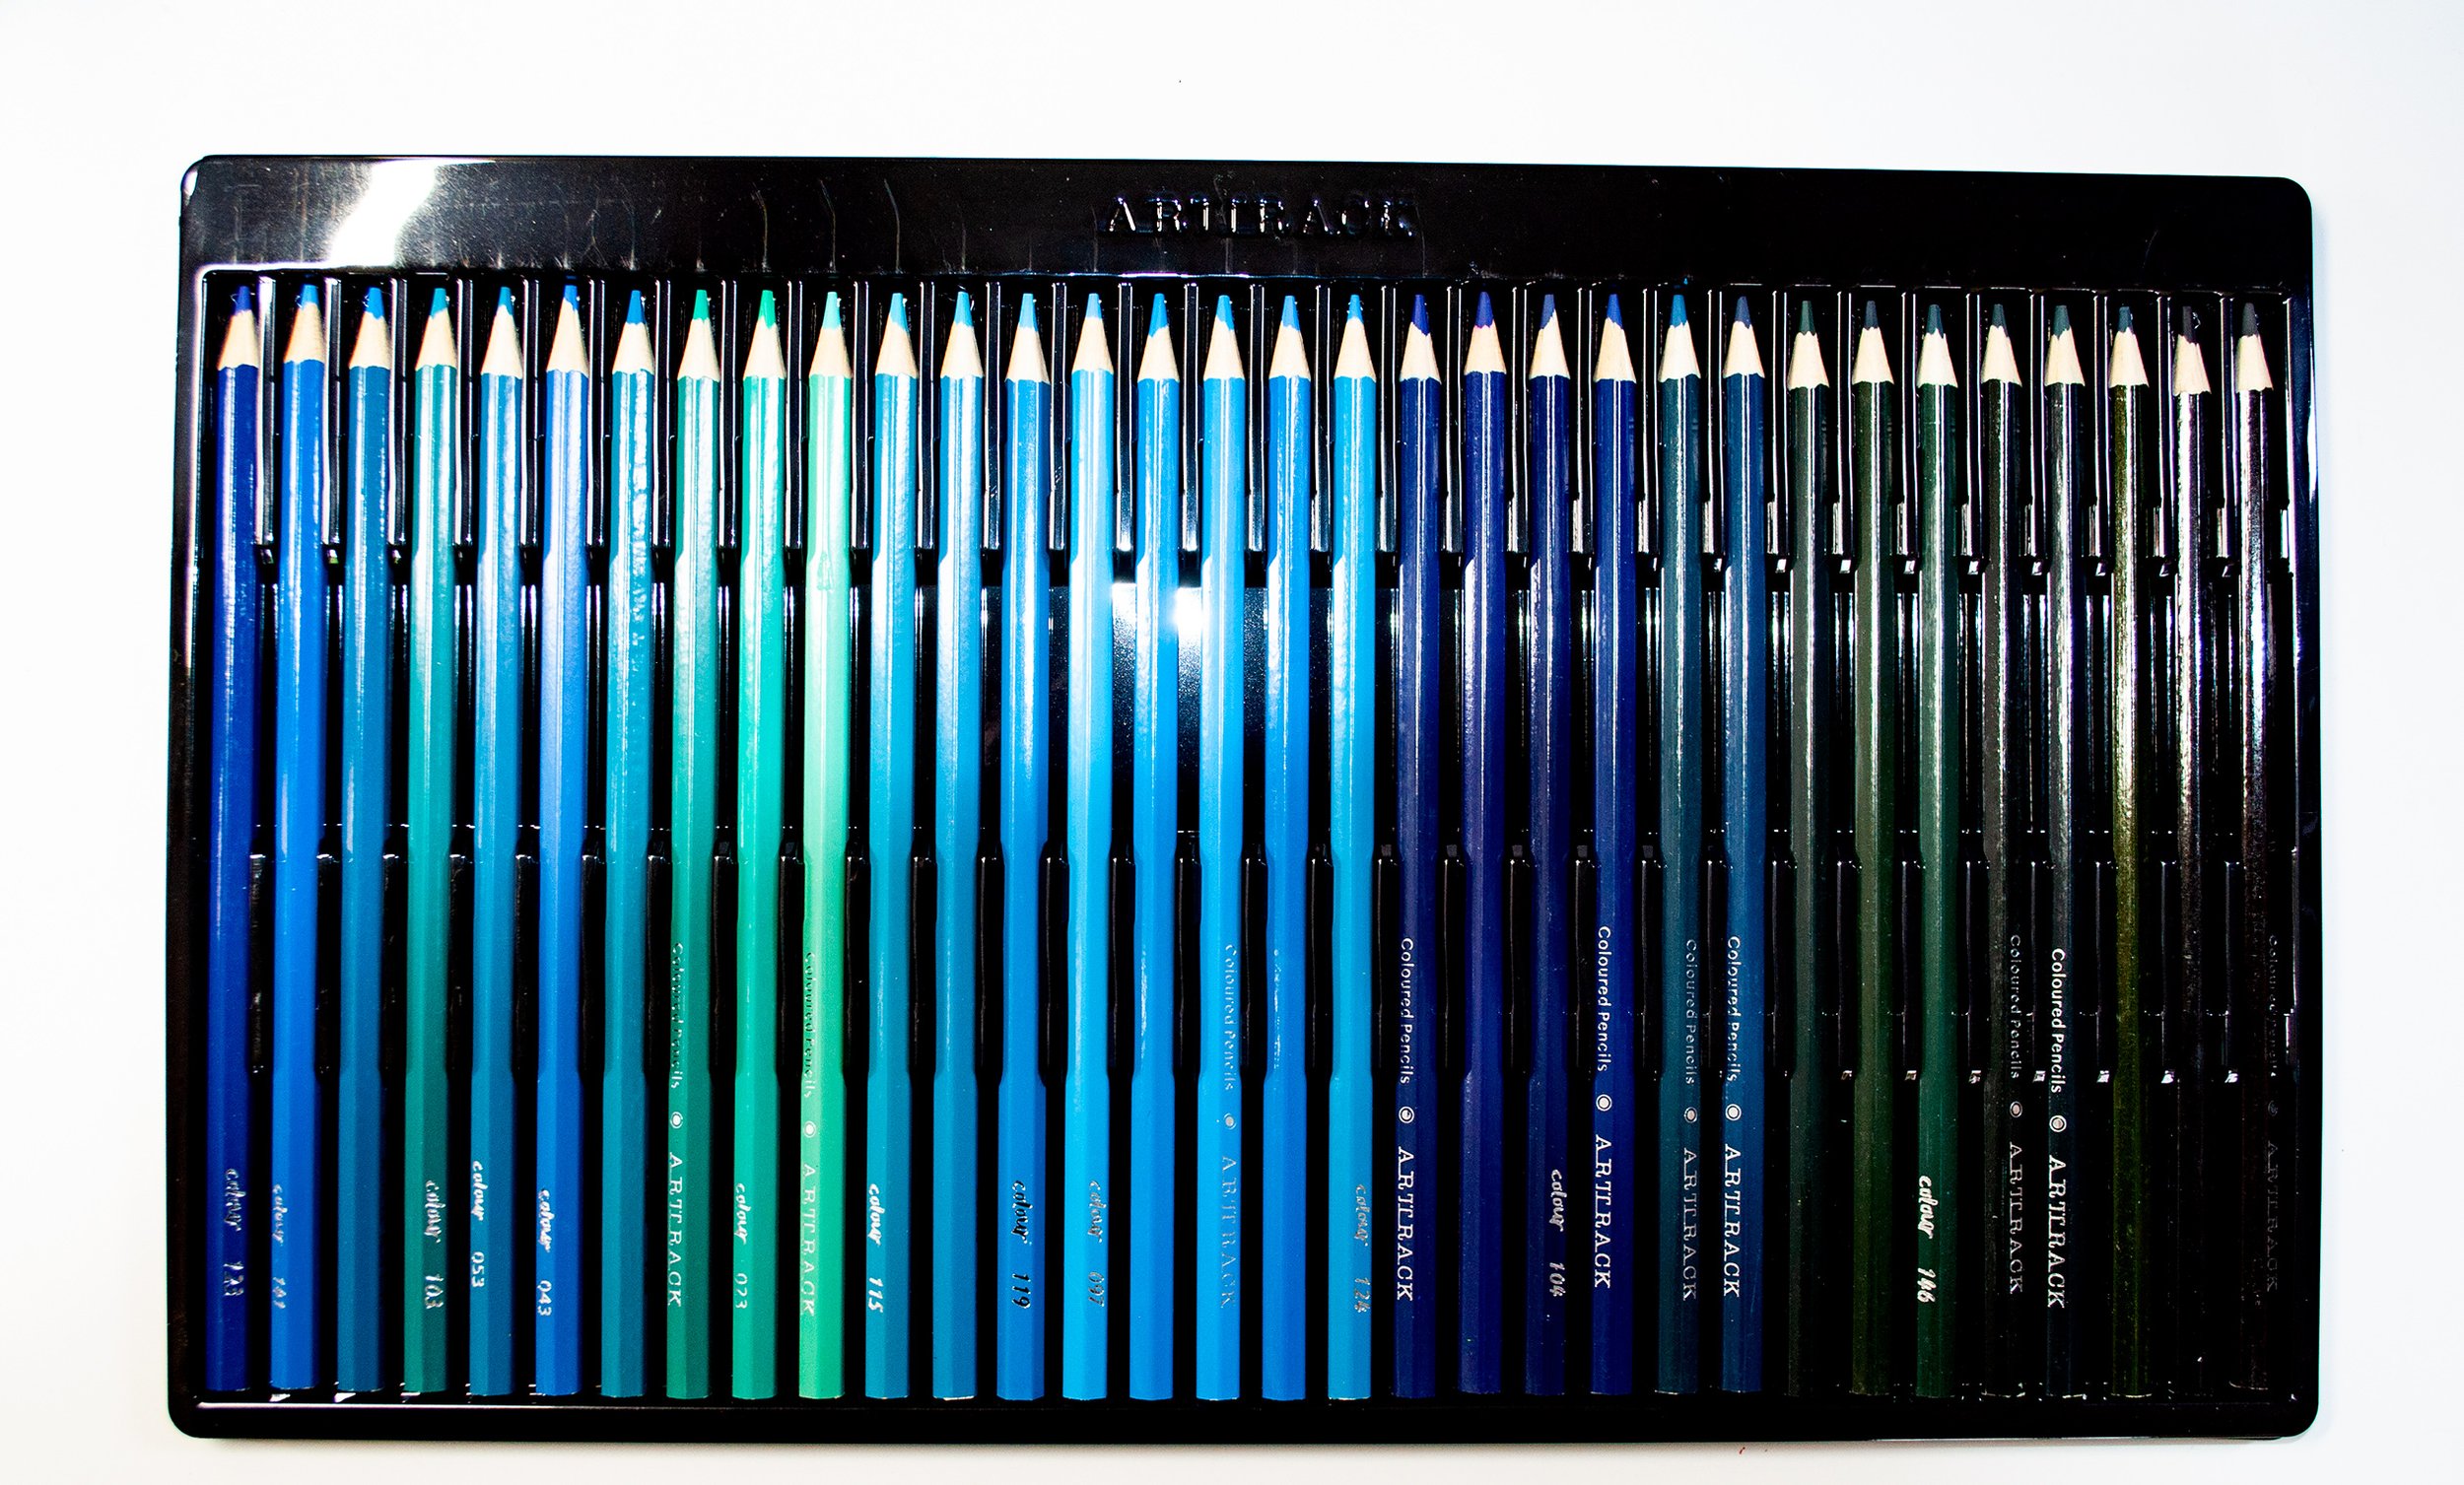 Corslet Multicolor 142 Pc Drawing Kit Sketch Pencils Set for